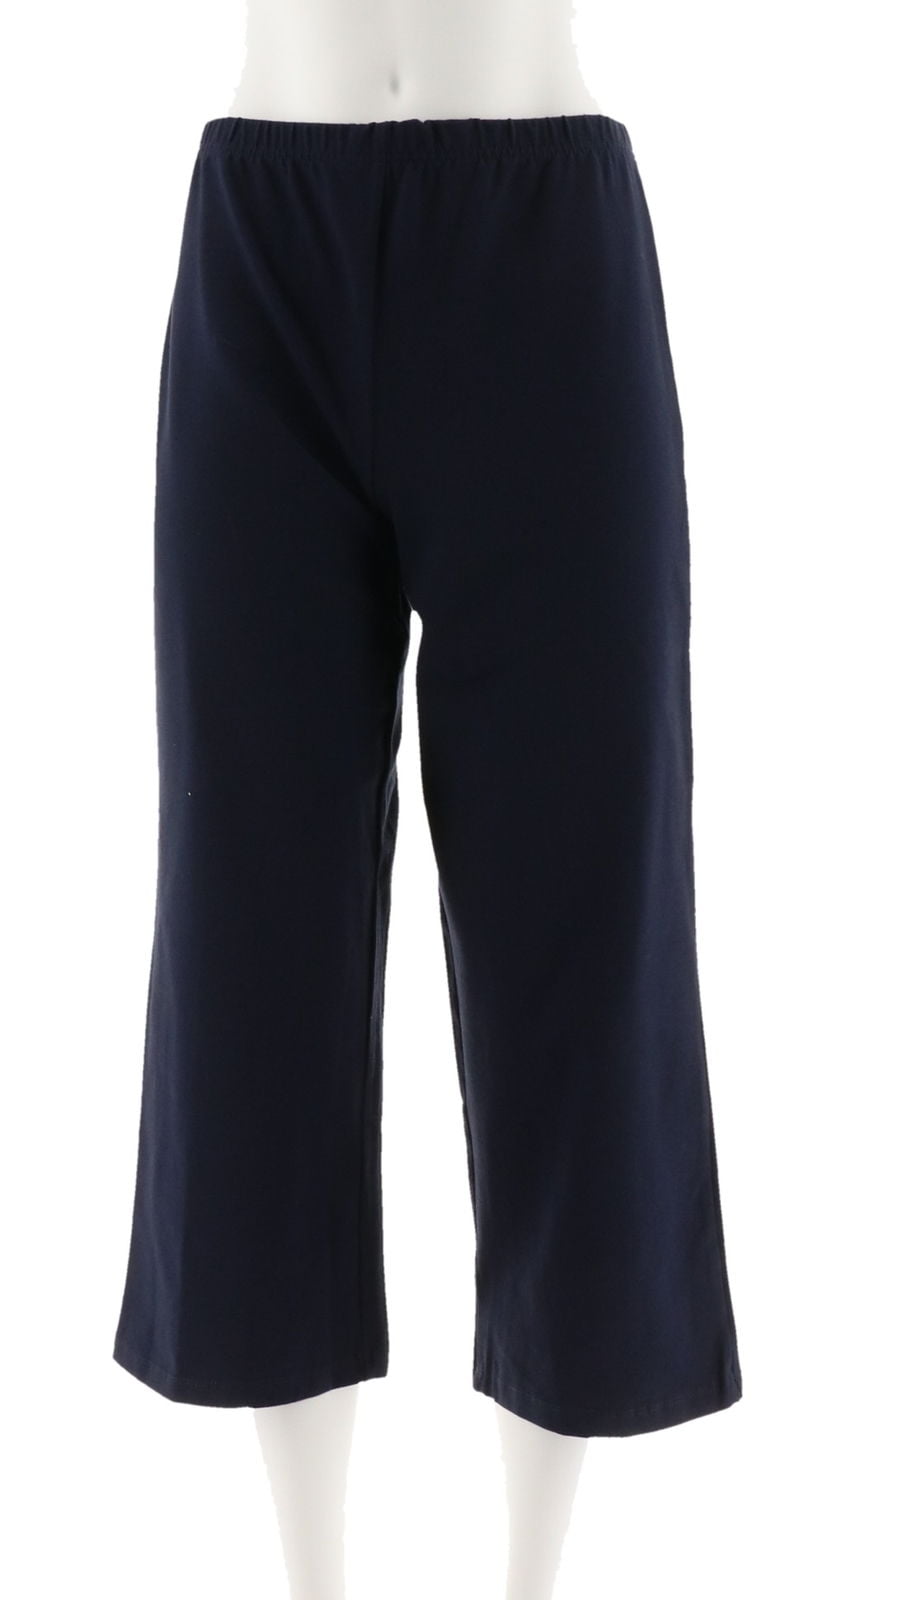 Women with Control Pull-on Knit Crop Pants A200215 - Walmart.com